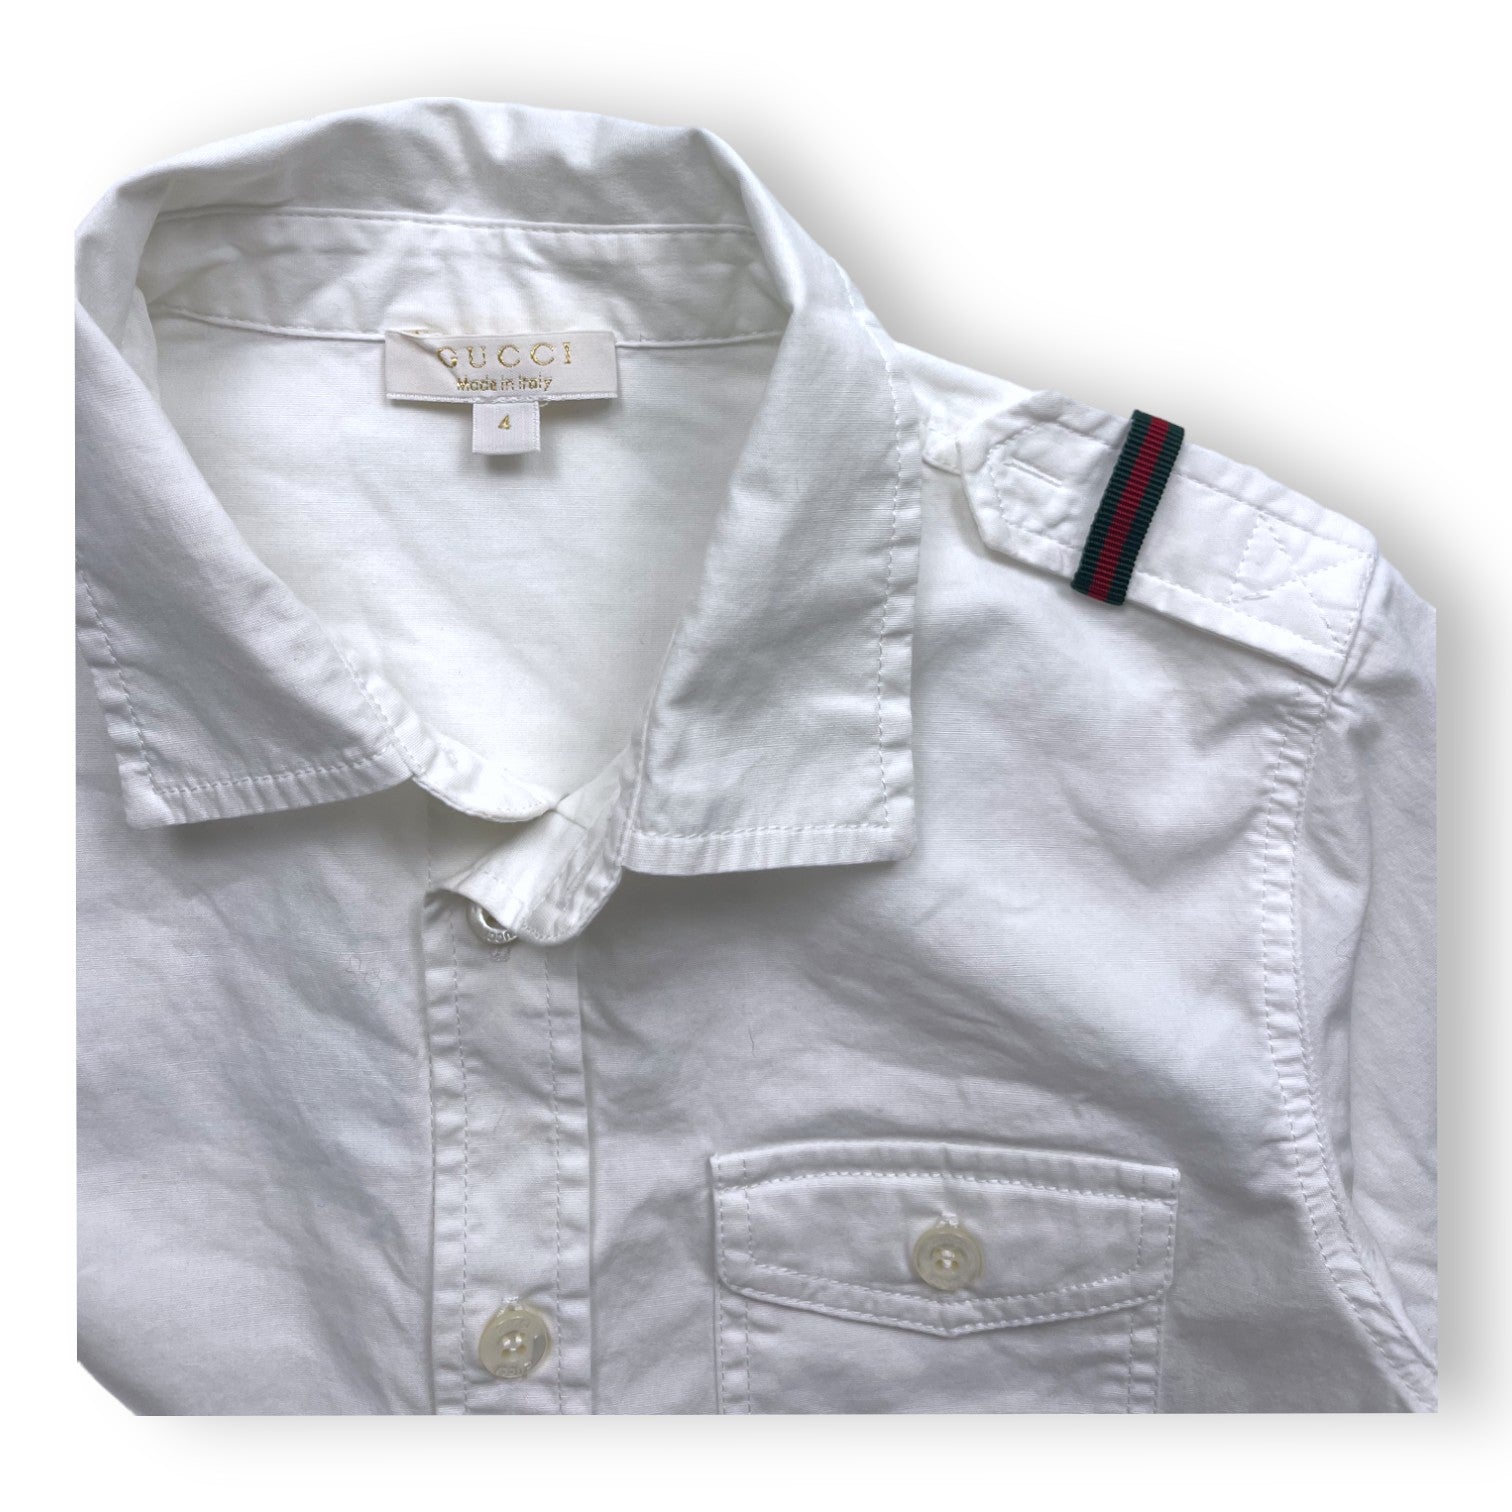 GUCCI - Chemise blanche - 4 ans